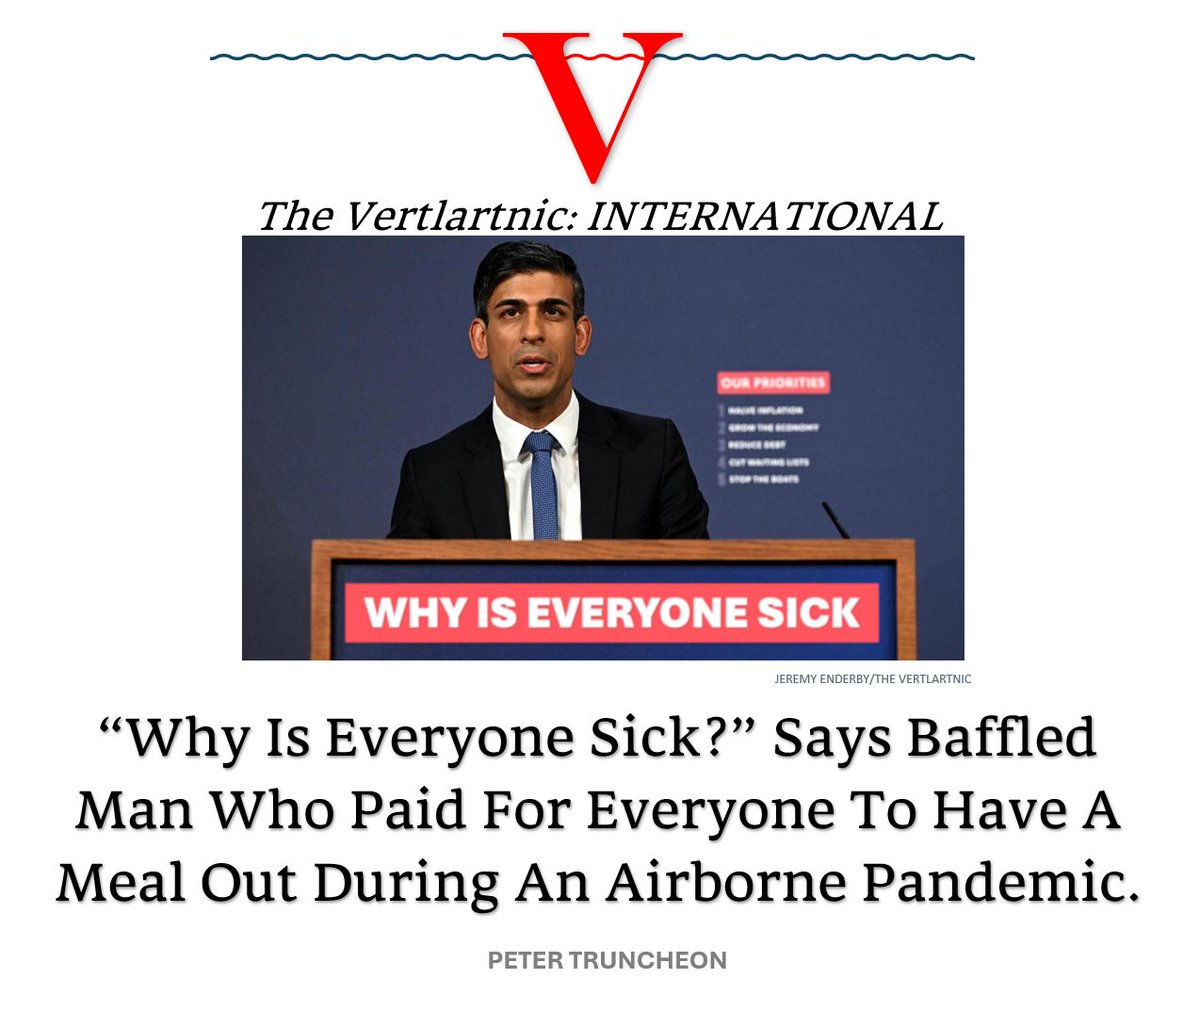 “Why Is Everyone Sick?” Says Baffled Man Who Paid For Everyone To Have A Meal Out During An Airborne Pandemic.